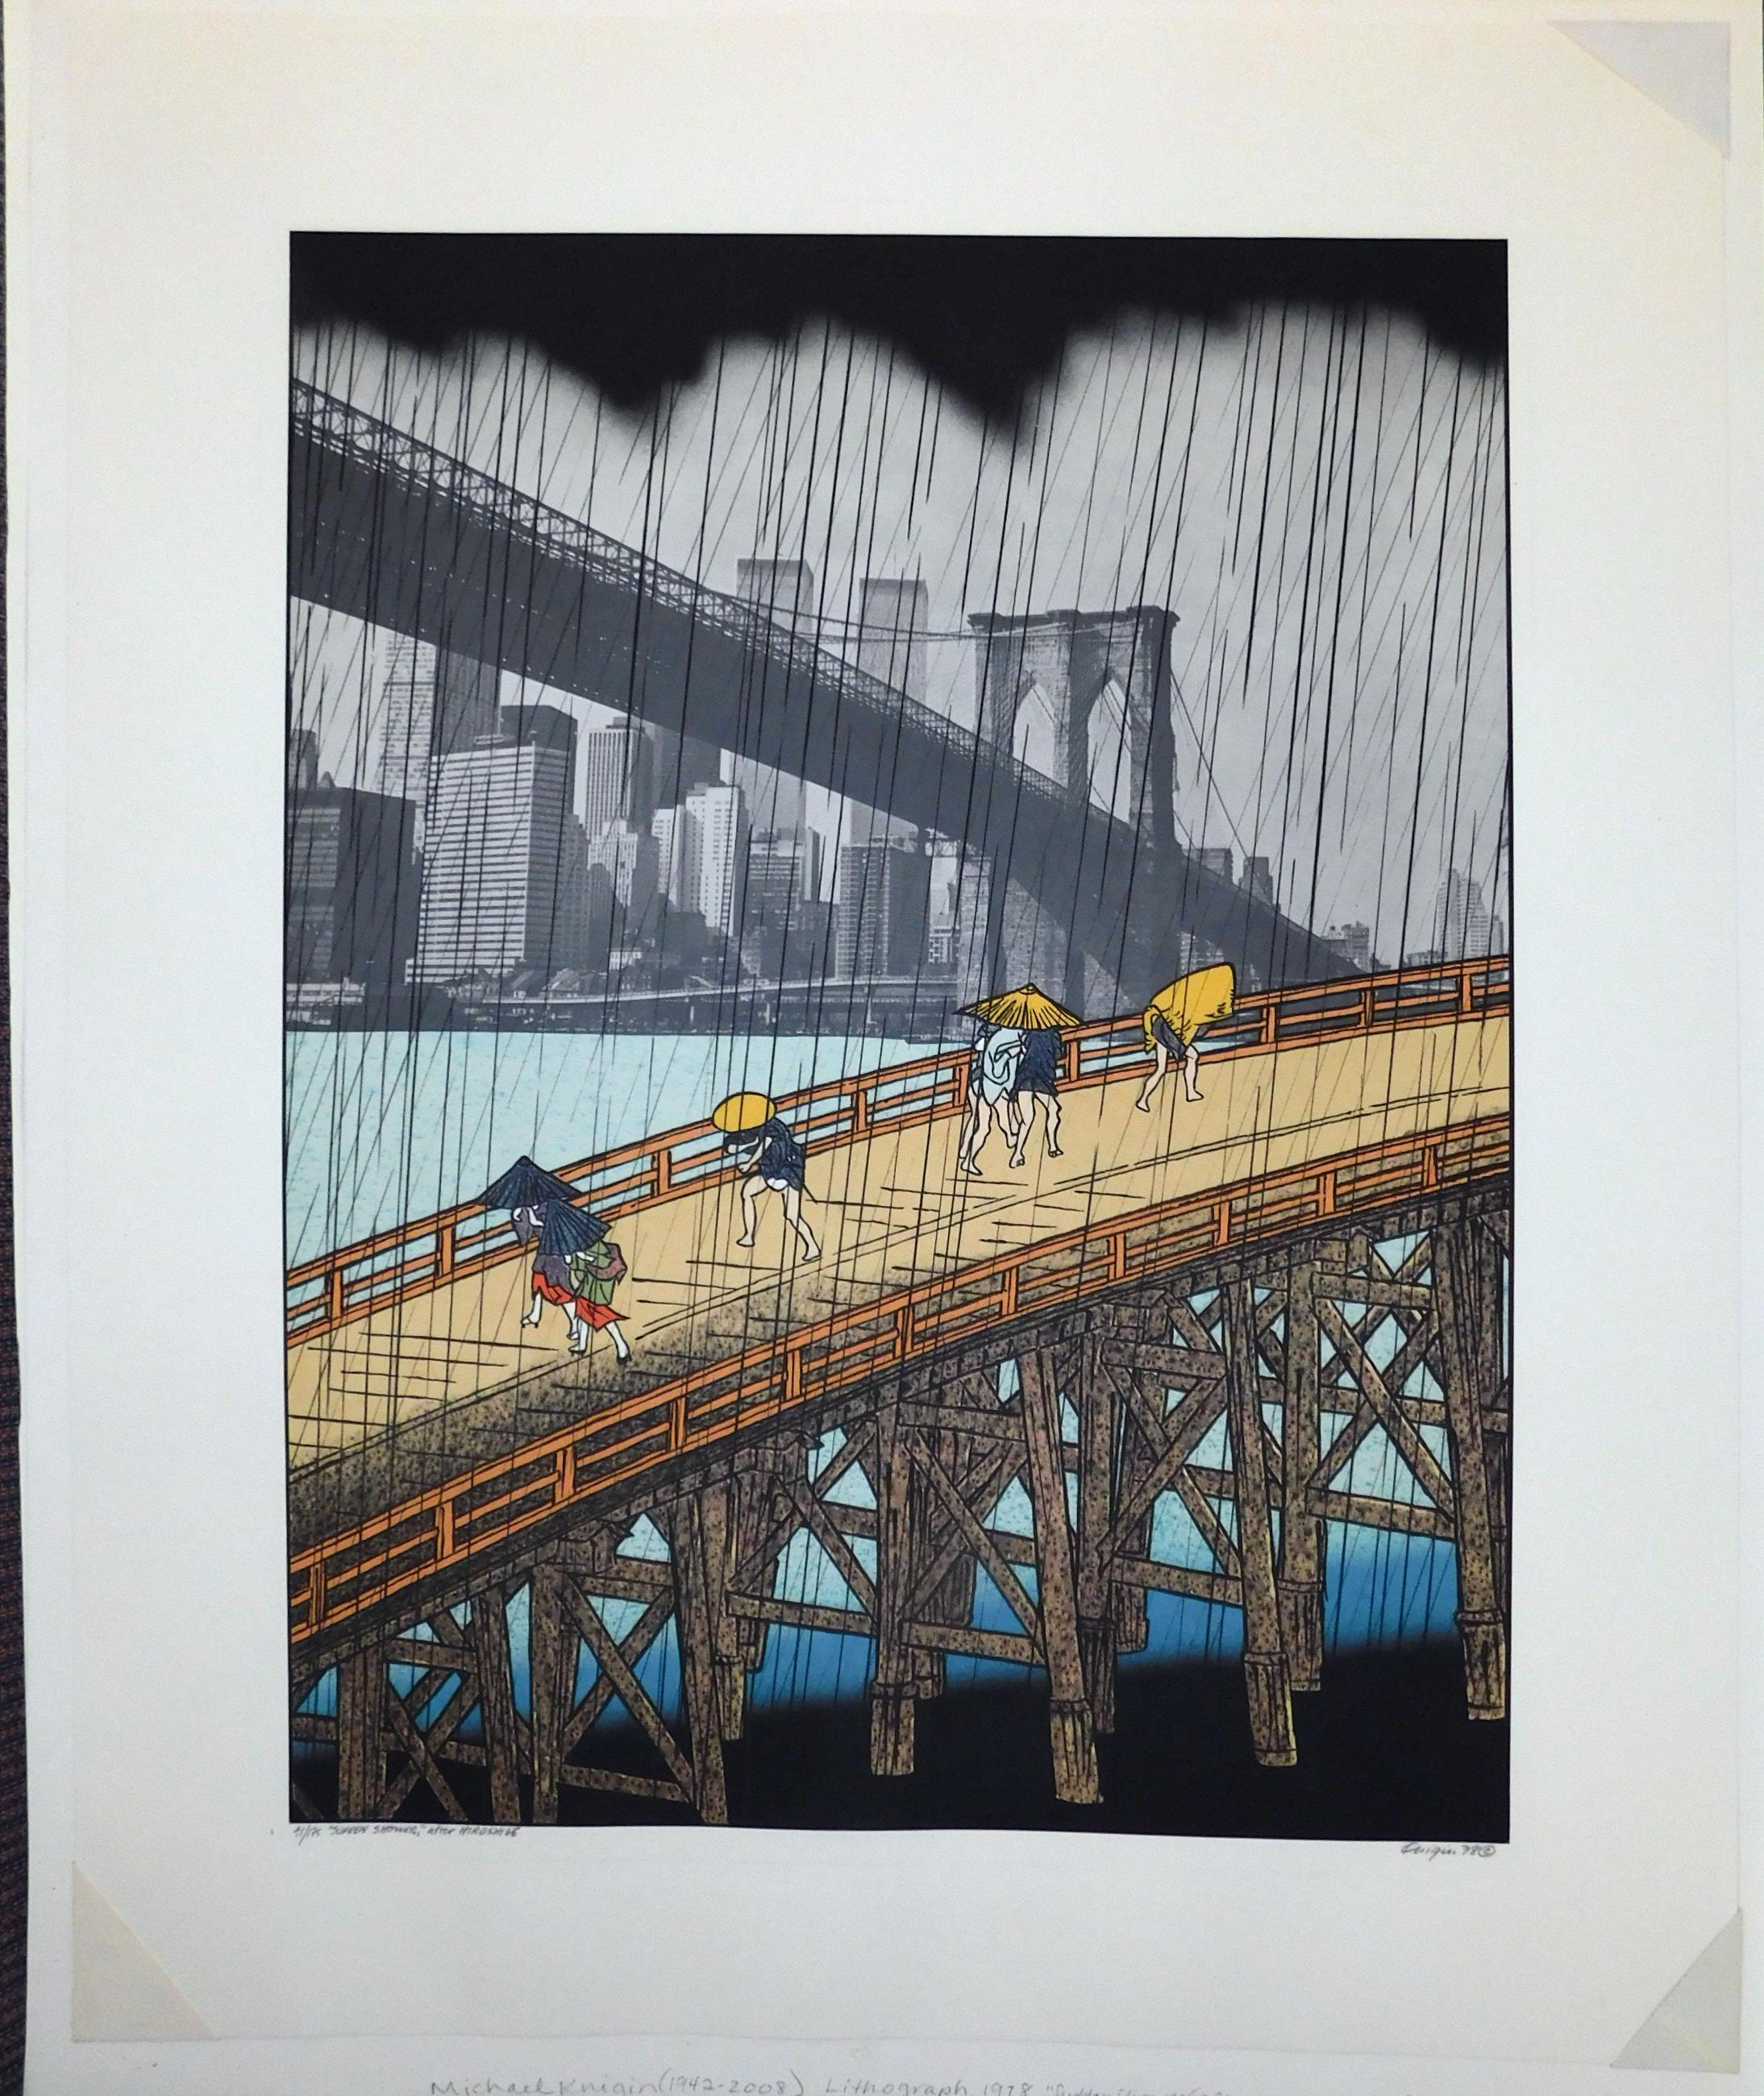 Color lithograph by Michael Knigin (b. 1942) New York Artist. Created 1978.
Edition size: 175. Presents in a 2 ply museum mat measuring 25 x 20.
Image: 18 1/4 x 14. Sheet: 23 1/4 x 19. In excellent condition with vibrant color.

Michael Knigin